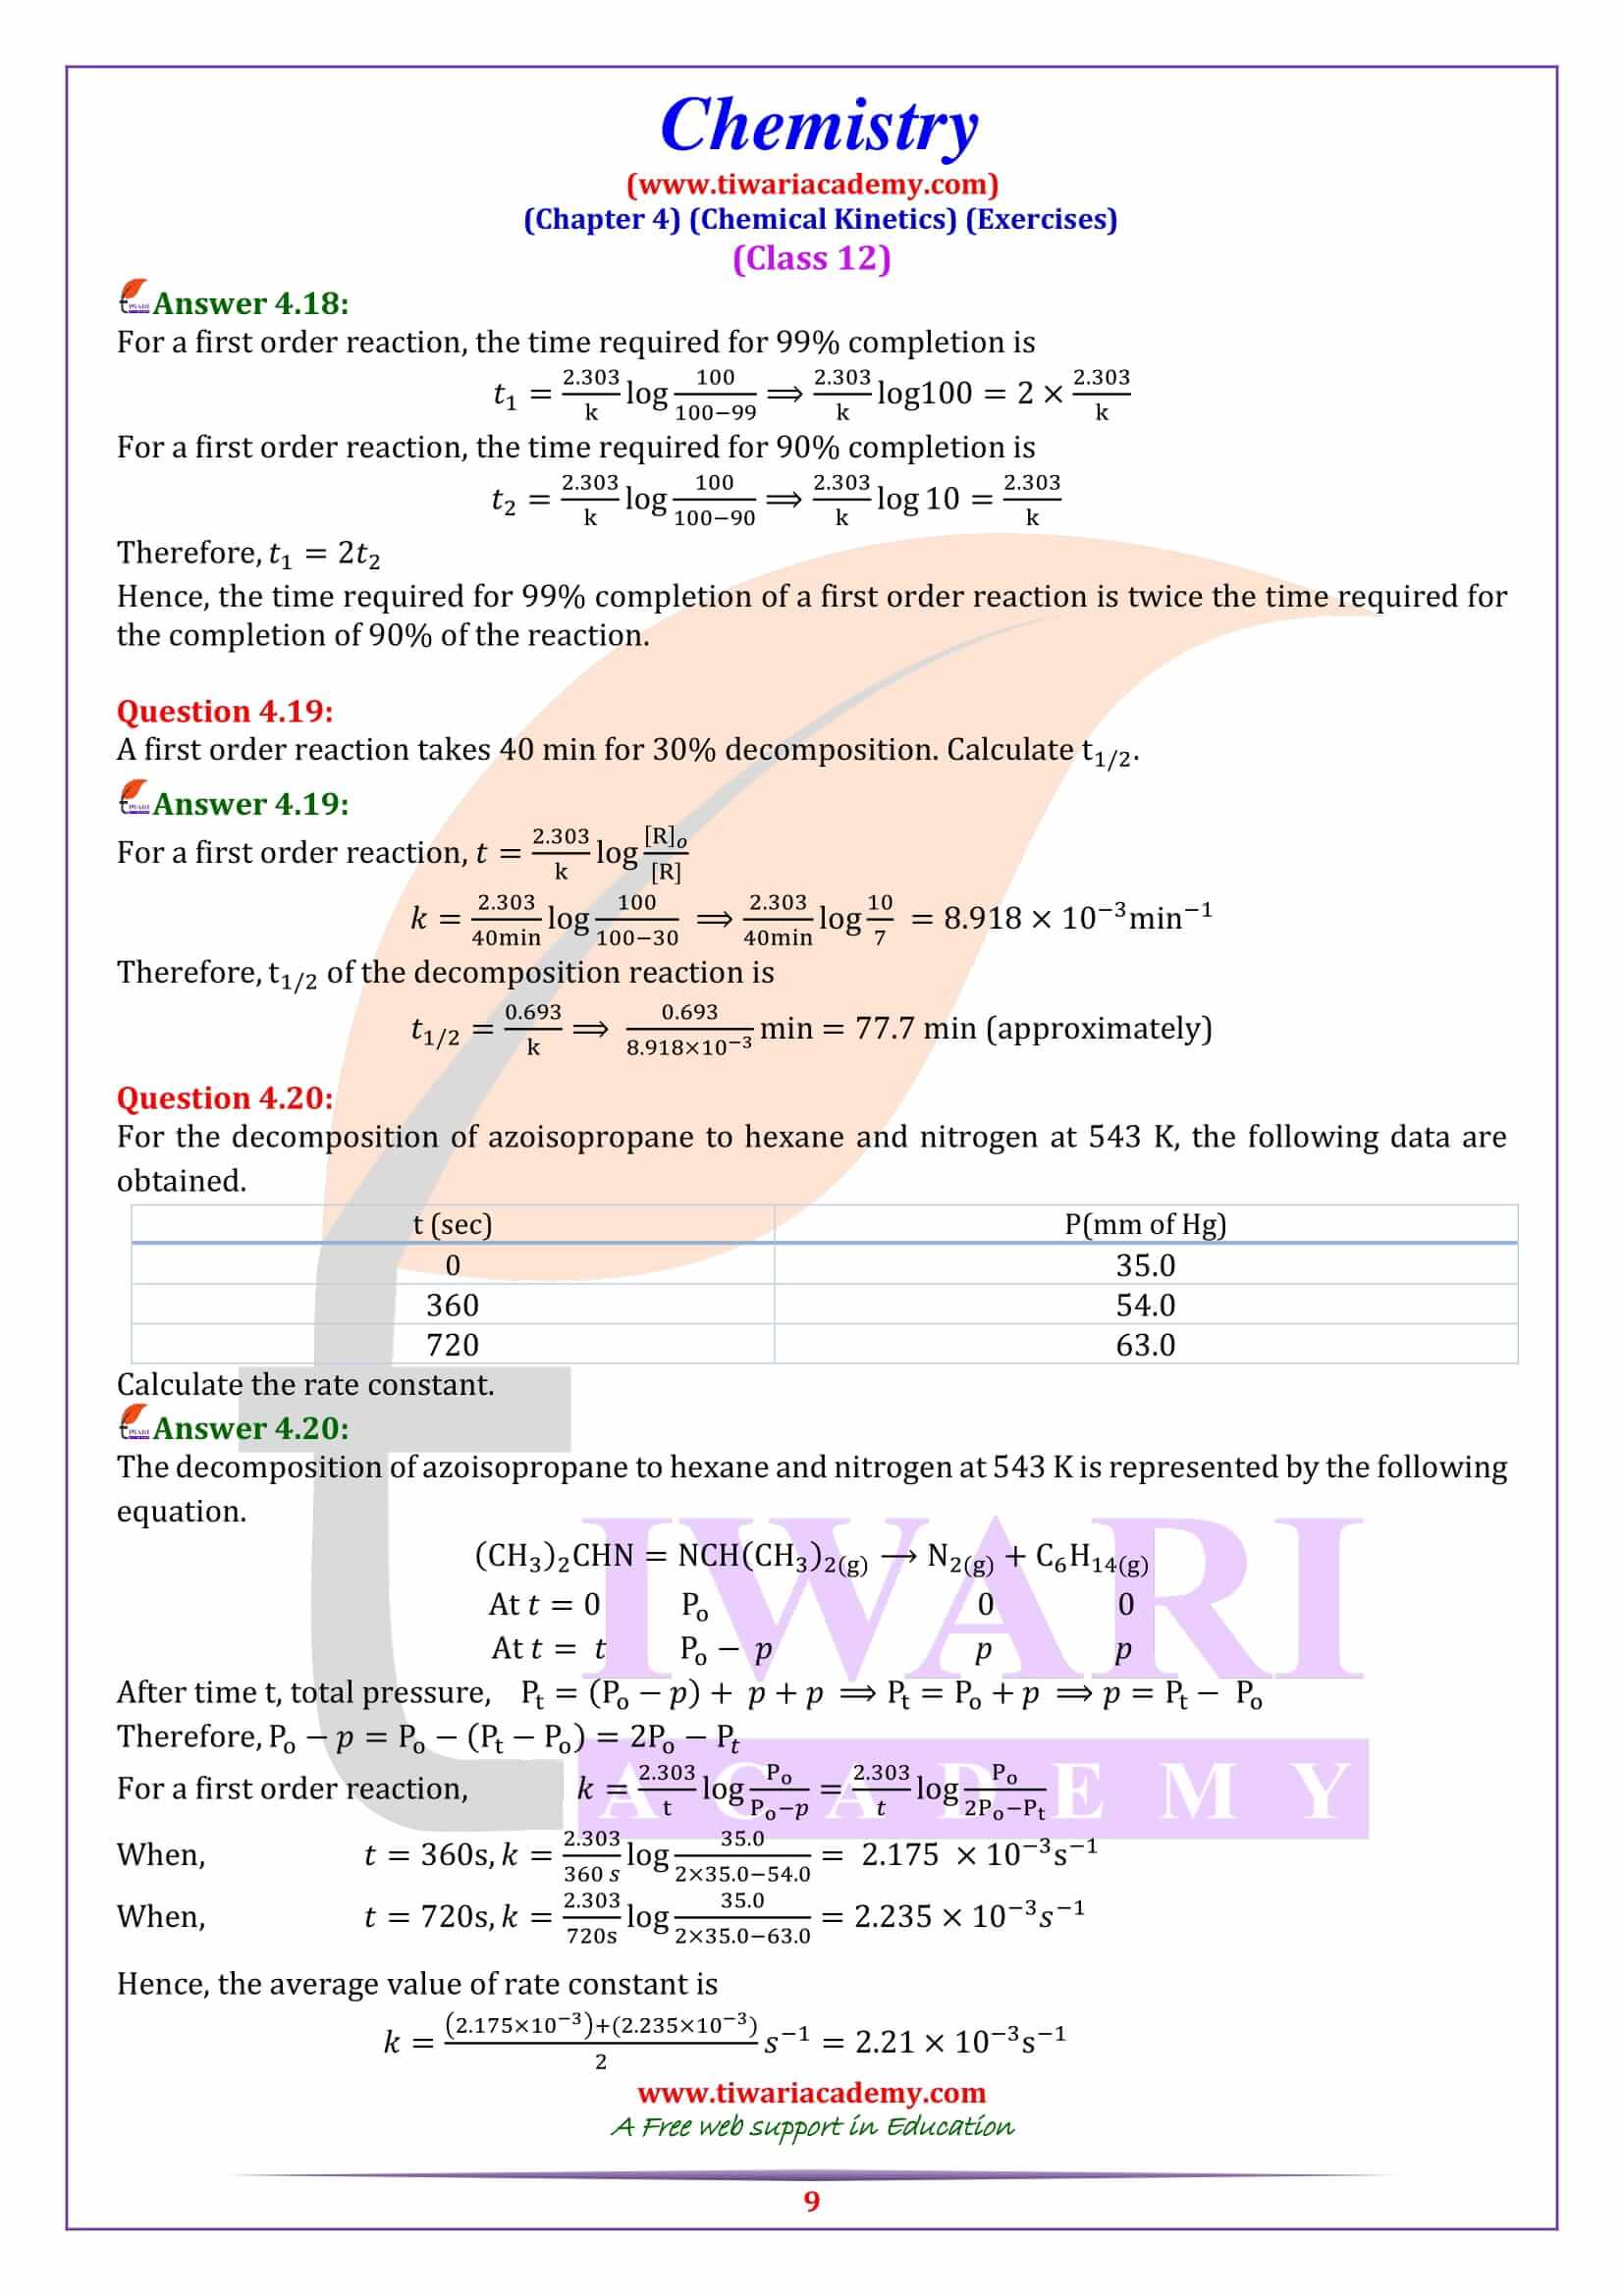 Class 12 Chemistry Chapter 4 Exercise Solutions